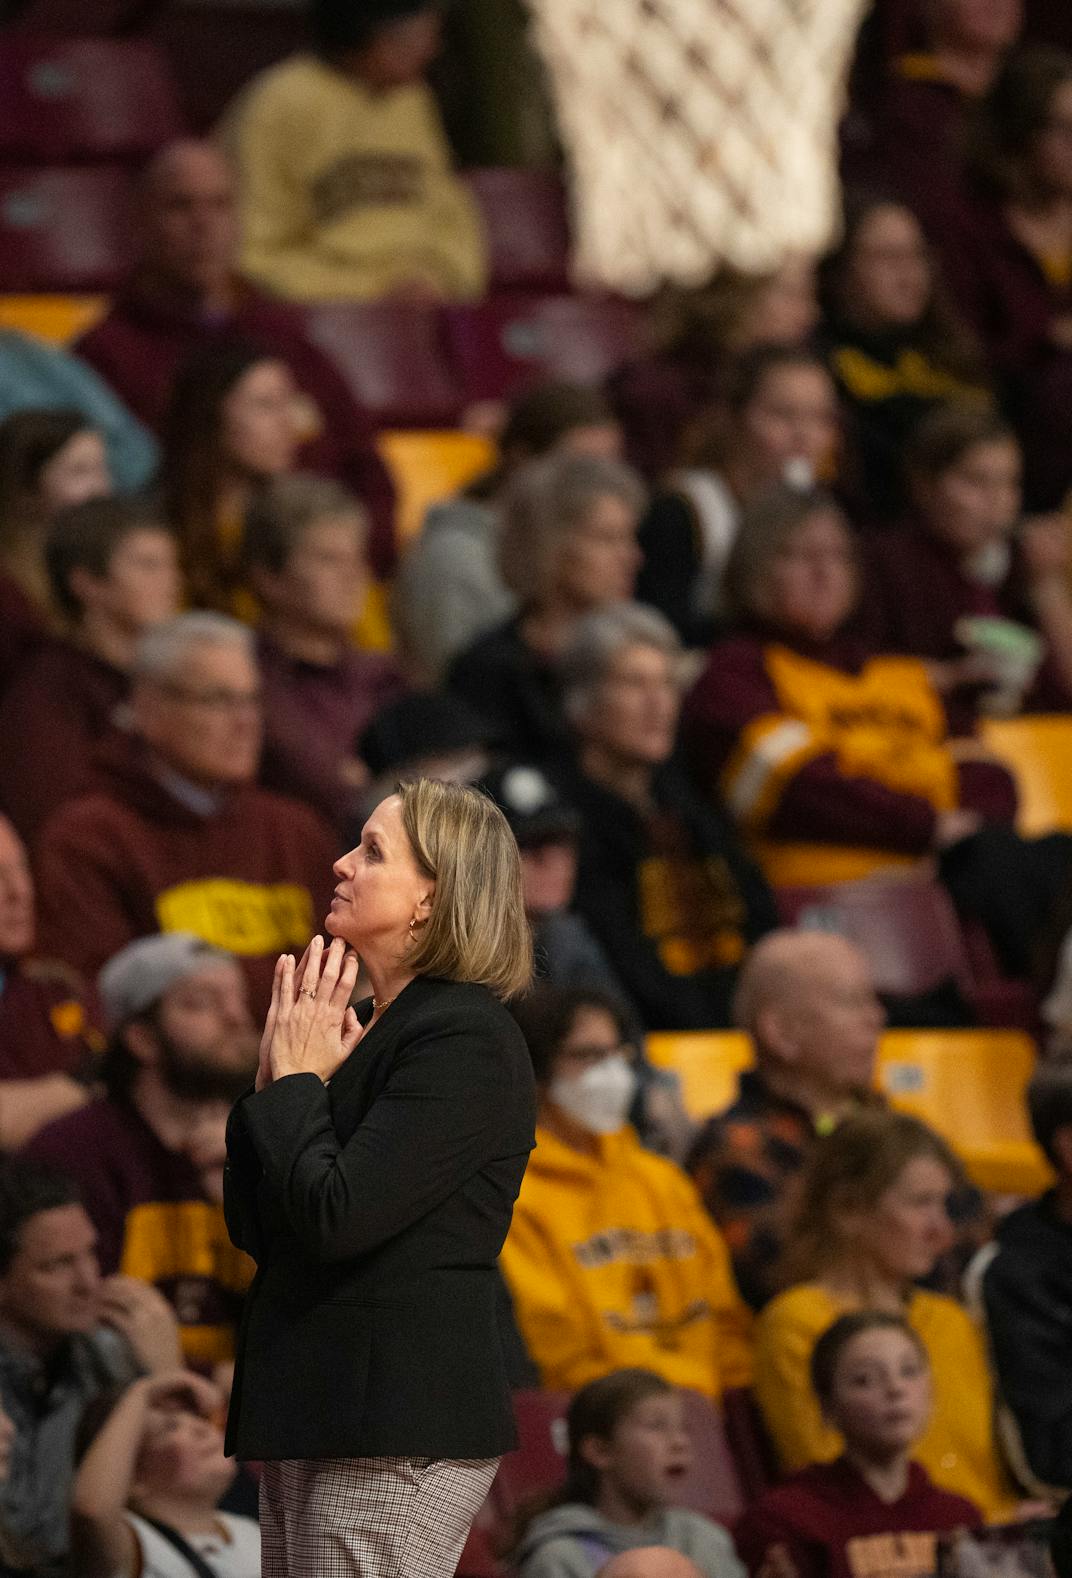 Photos: Gophers lose 80-64 to Penn State